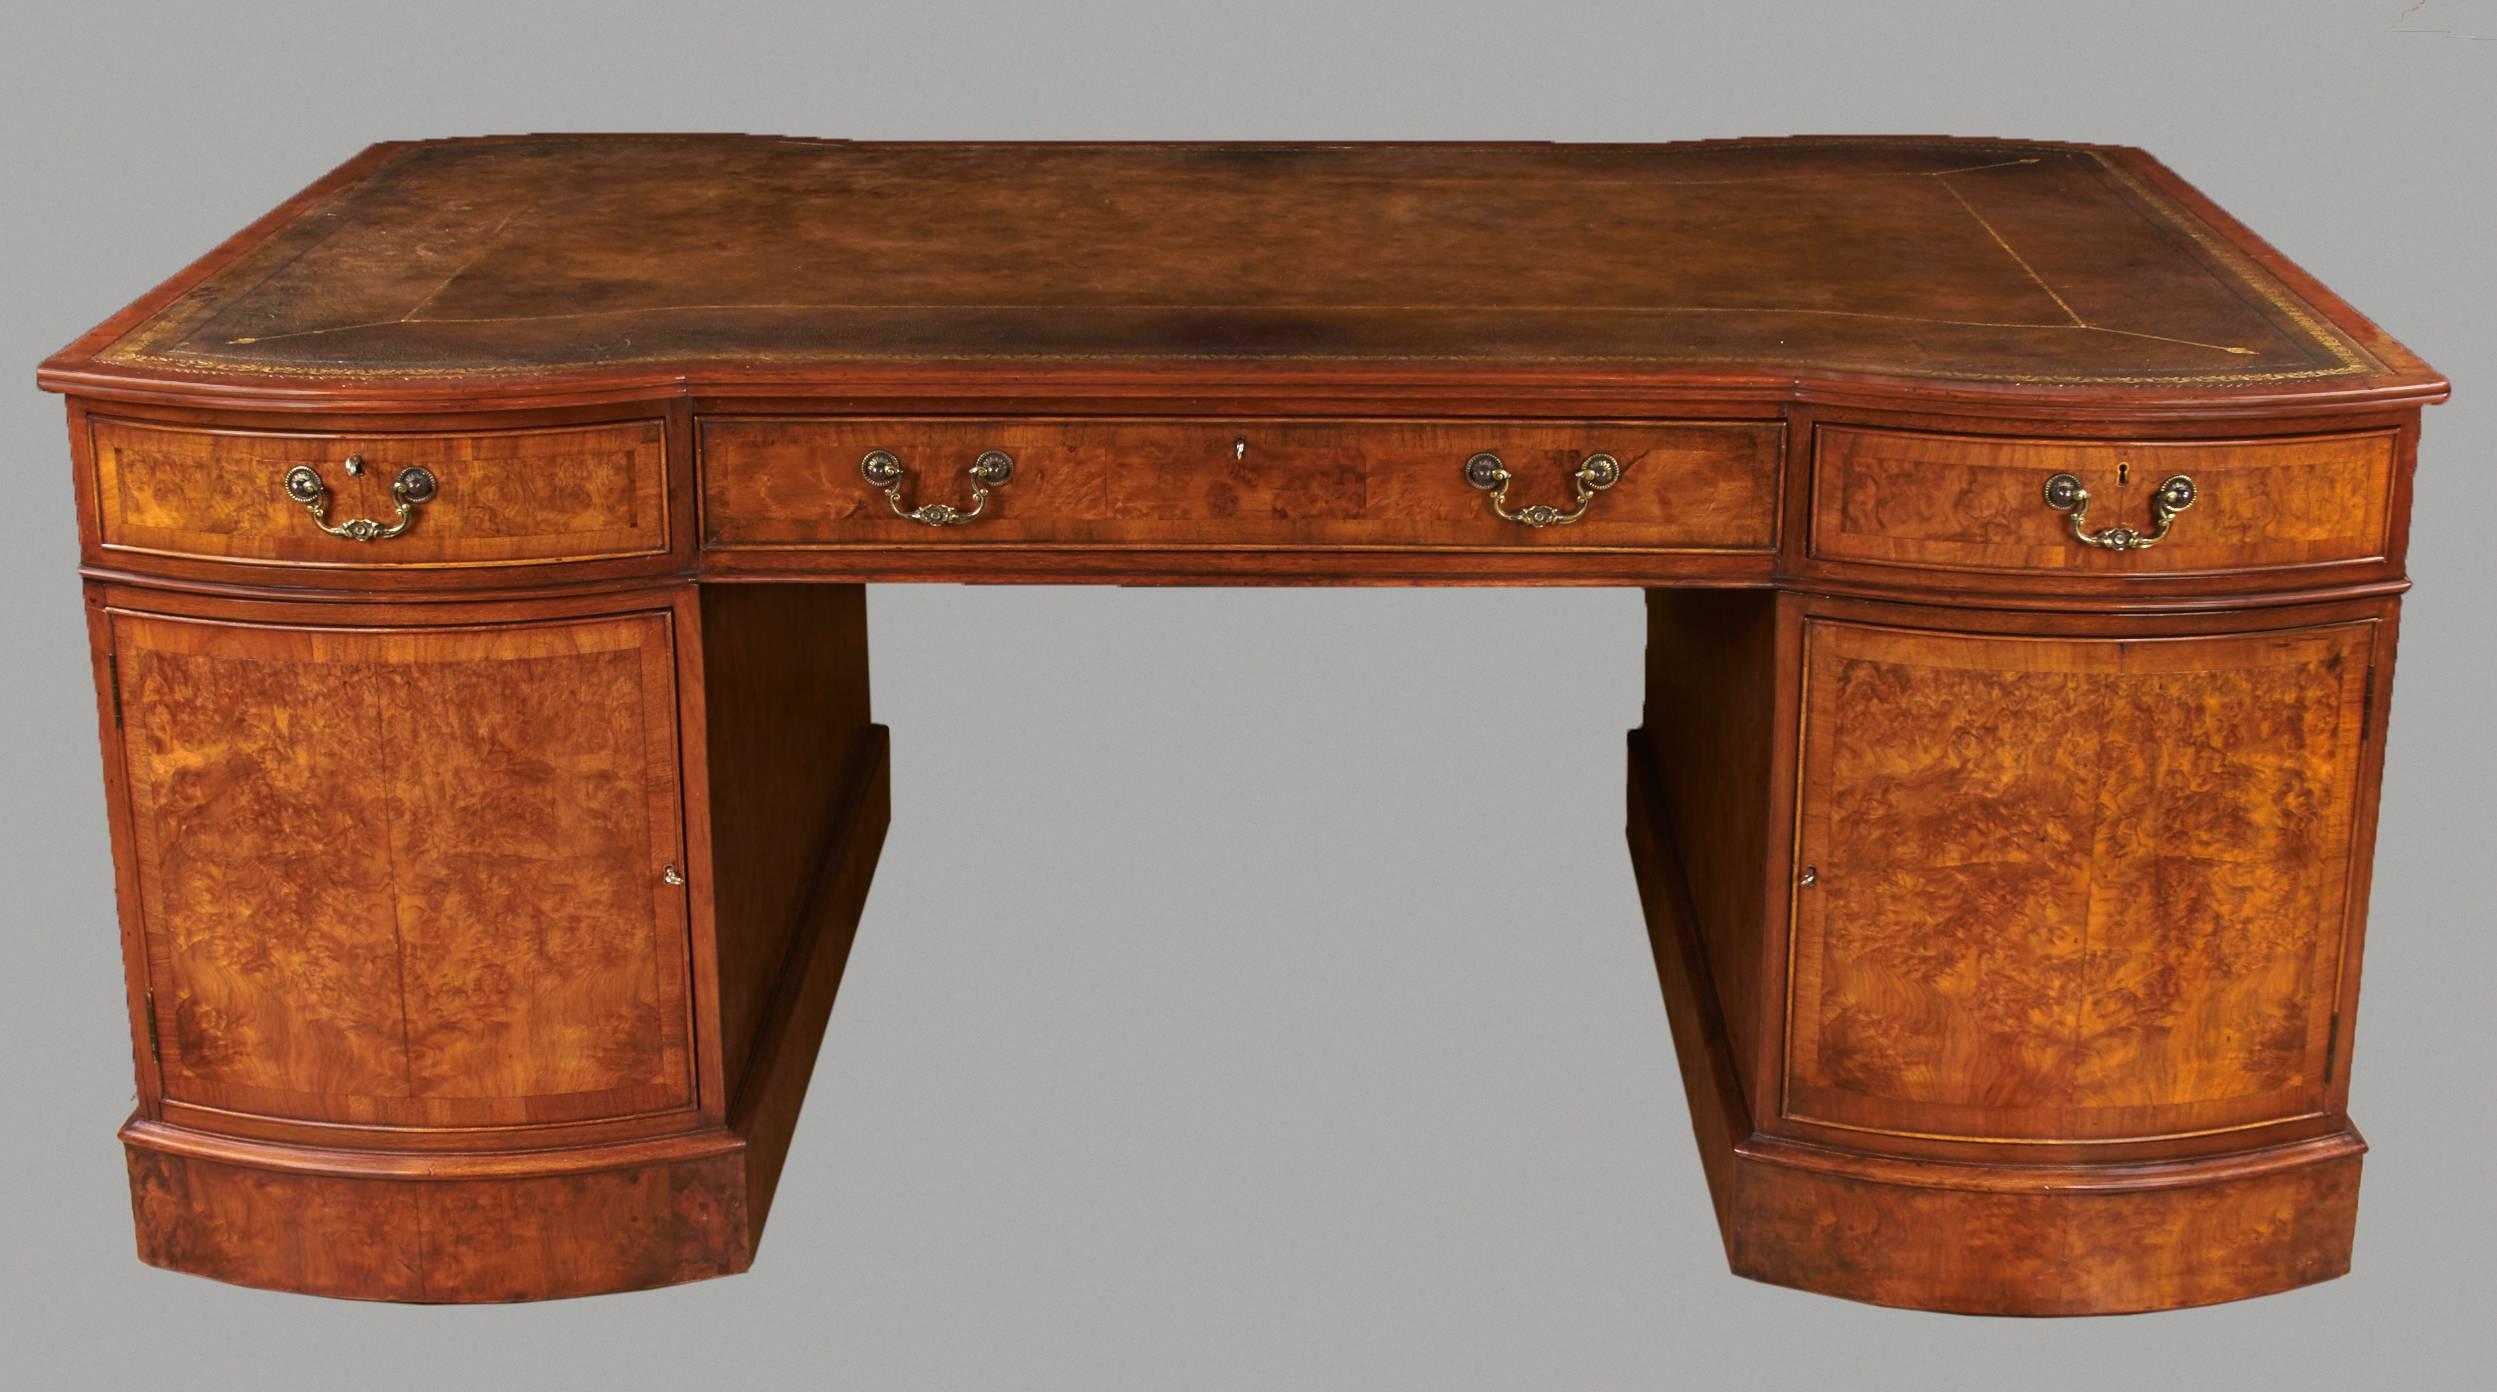 A good quality English Georgian style figured walnut partner's desk, the gilt-tooled brown leather top with a moulded edge above two banks of convex graduated pedestal drawers, the back with frieze drawers above cabinet doors each enclosing a single